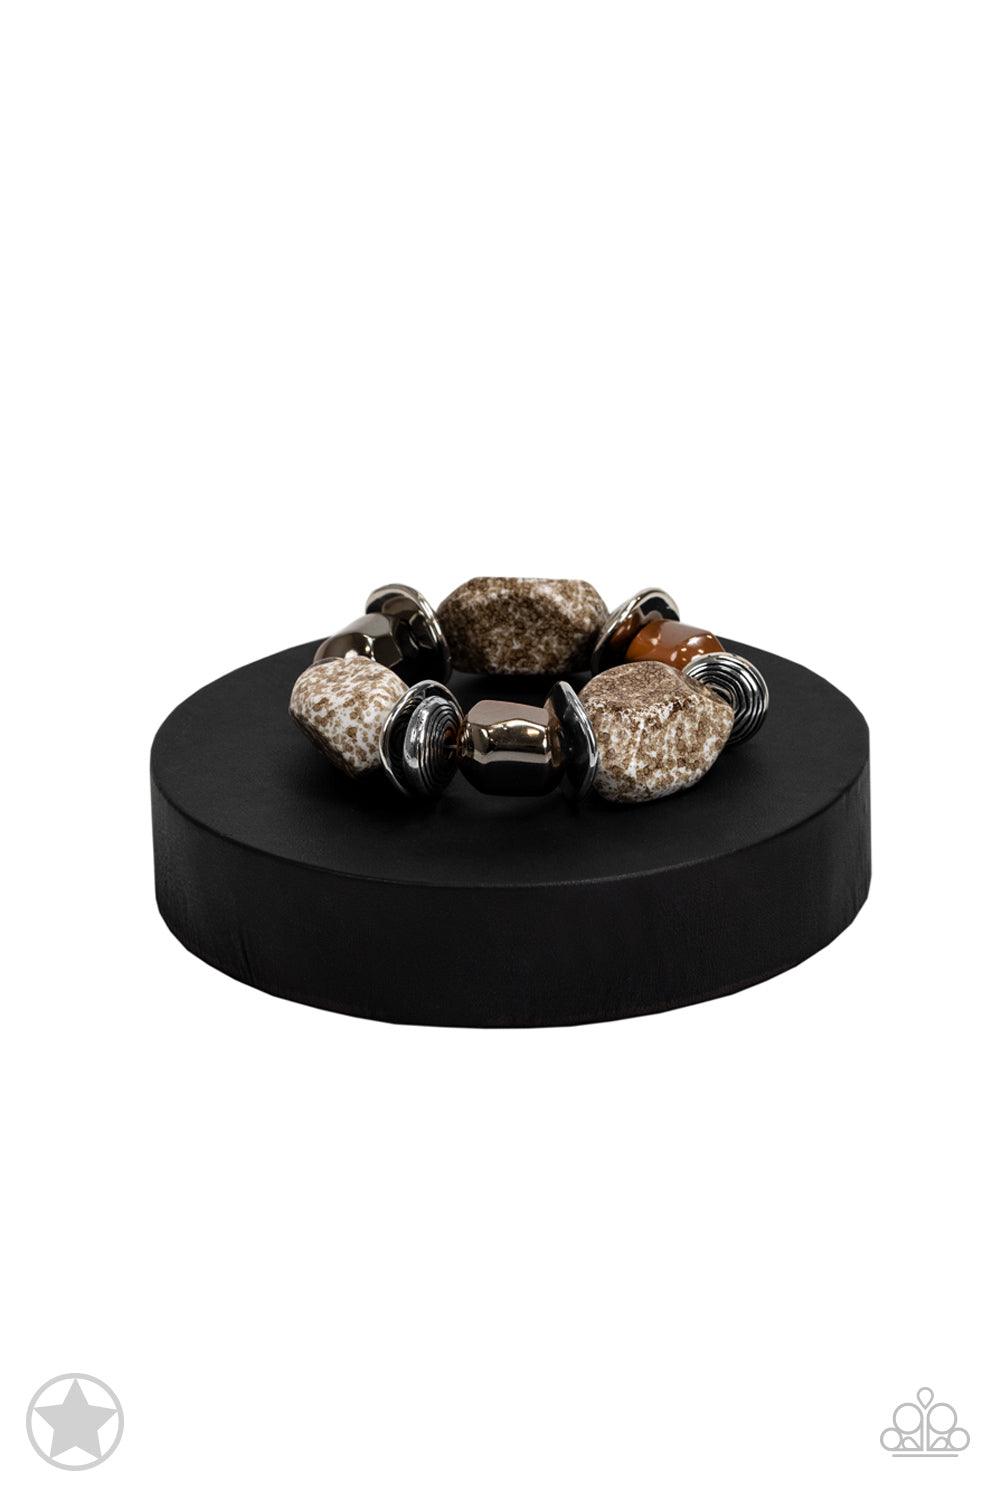 Paparazzi Accessories Glaze of Glory - Brown Chunky peach beads combine with intricate silver details on a stretchy band. Matches Blockbuster Necklace. Sold as one individual bracelet. Jewelry